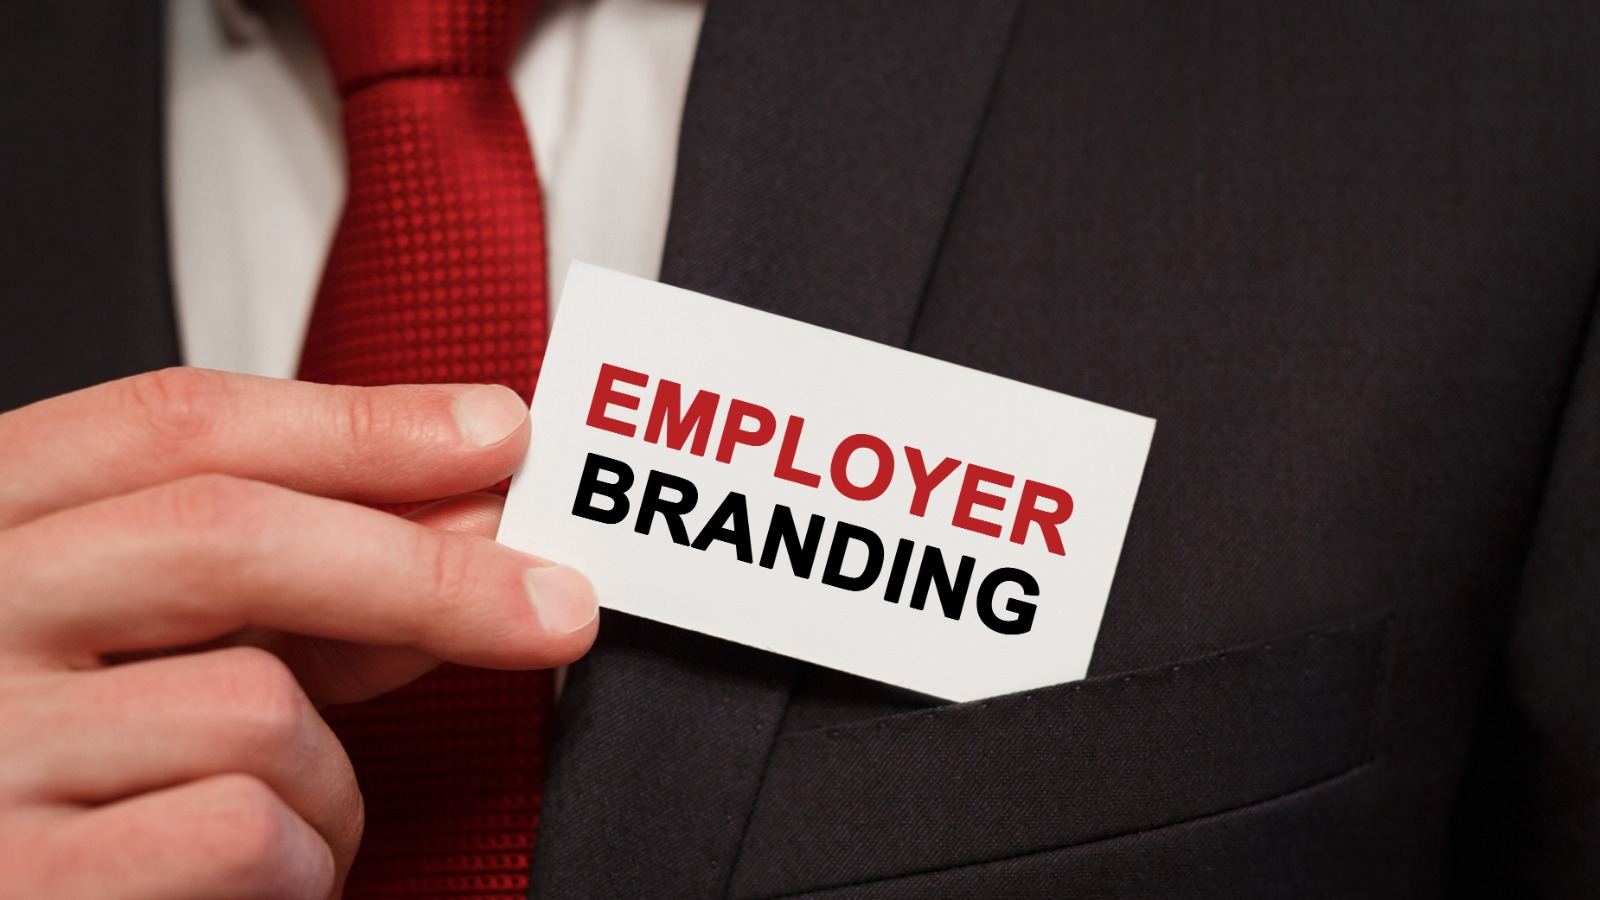 How to Build a Strong Employer Brand on a Limited Budget